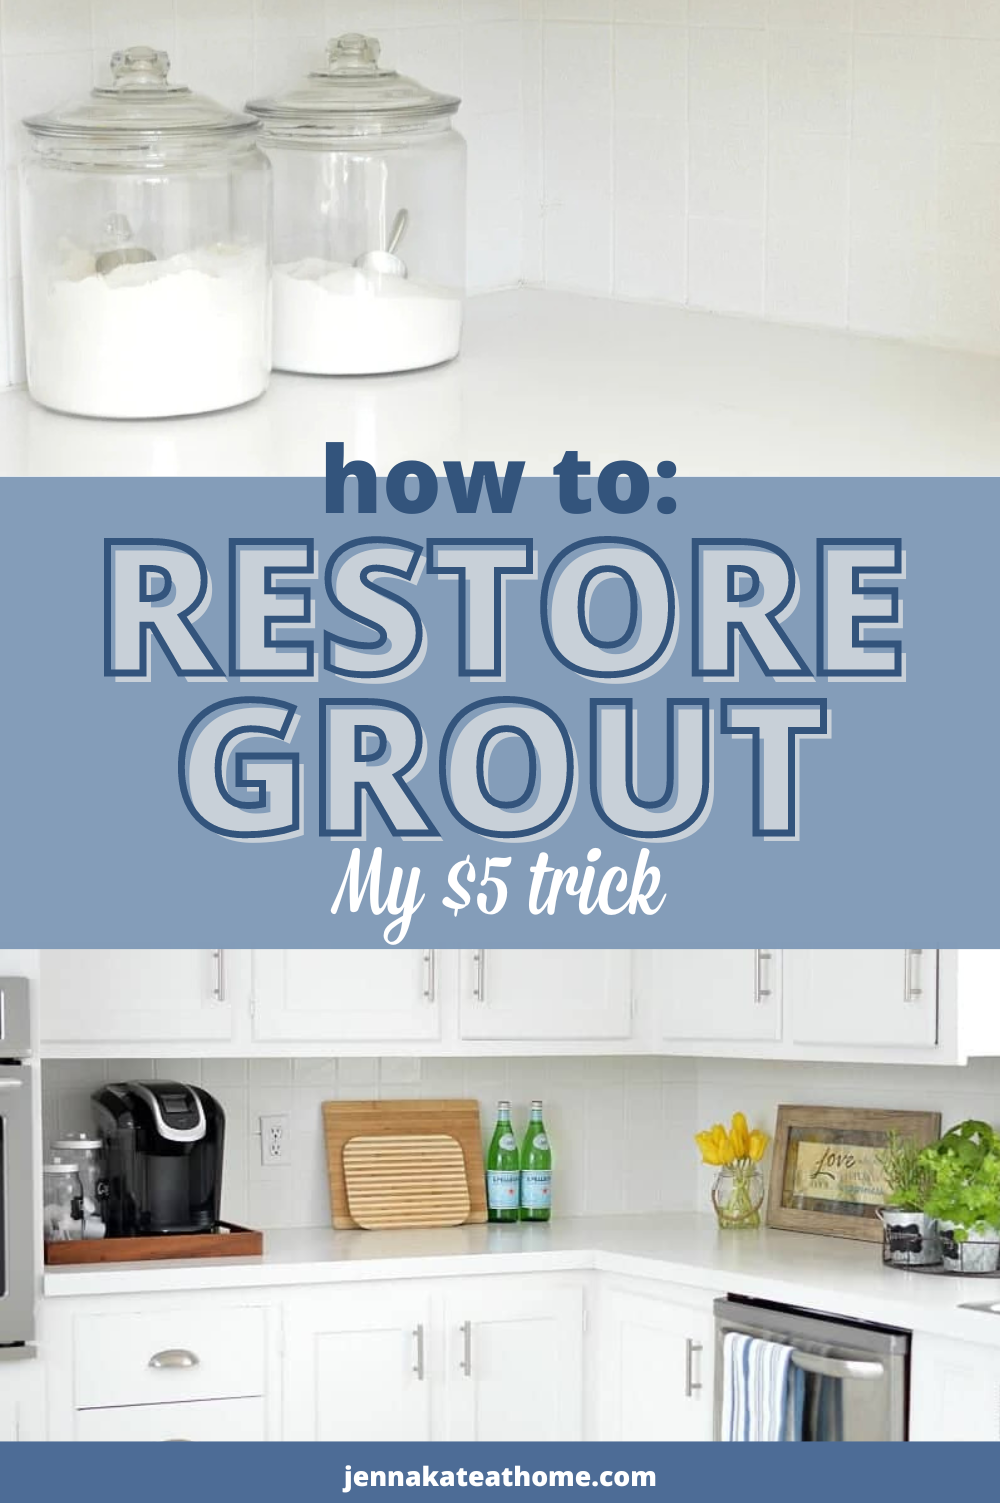 how to restore grout for $5